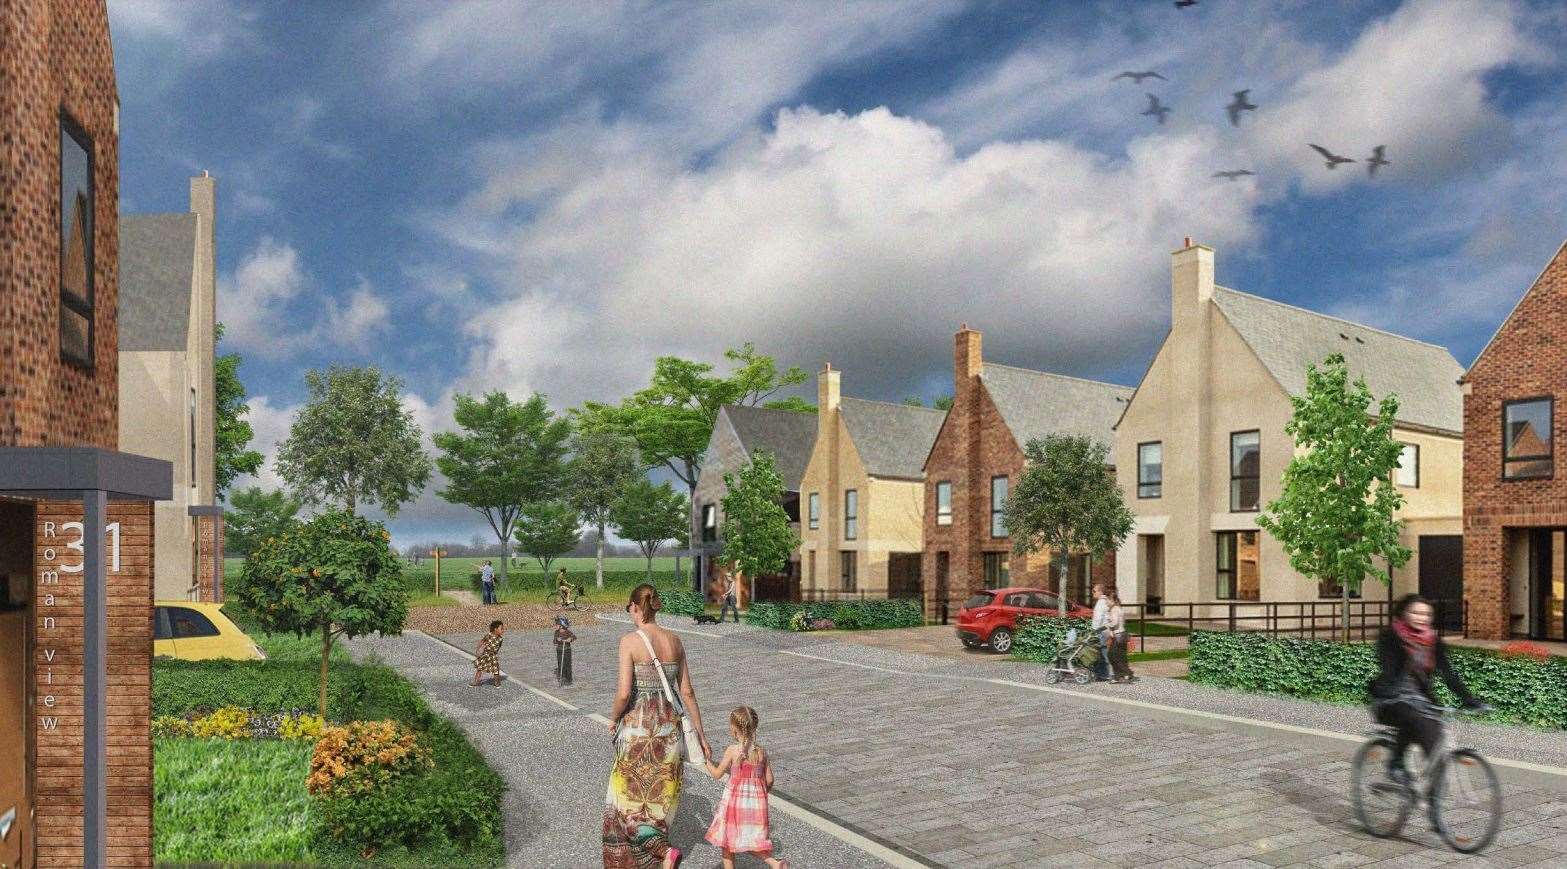 An artist's impression of how the development will look